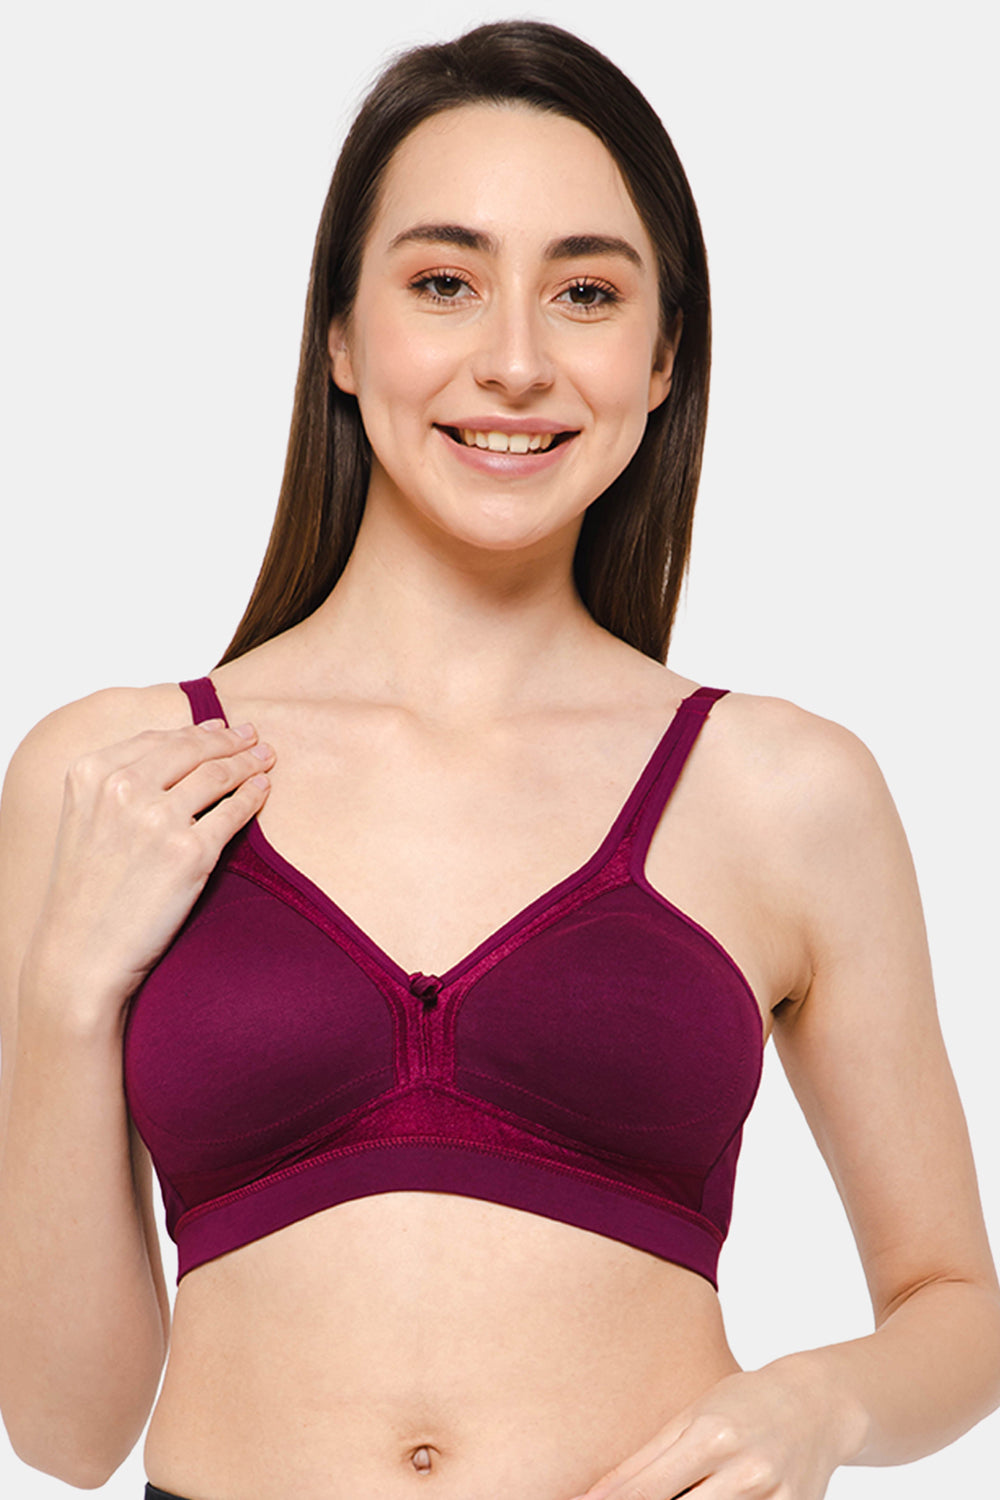 Buy Floret Women's Padded/Non-Wired & Full Coverage/T-Shirt with  Convertible-Strap Bra (30B, Black) at